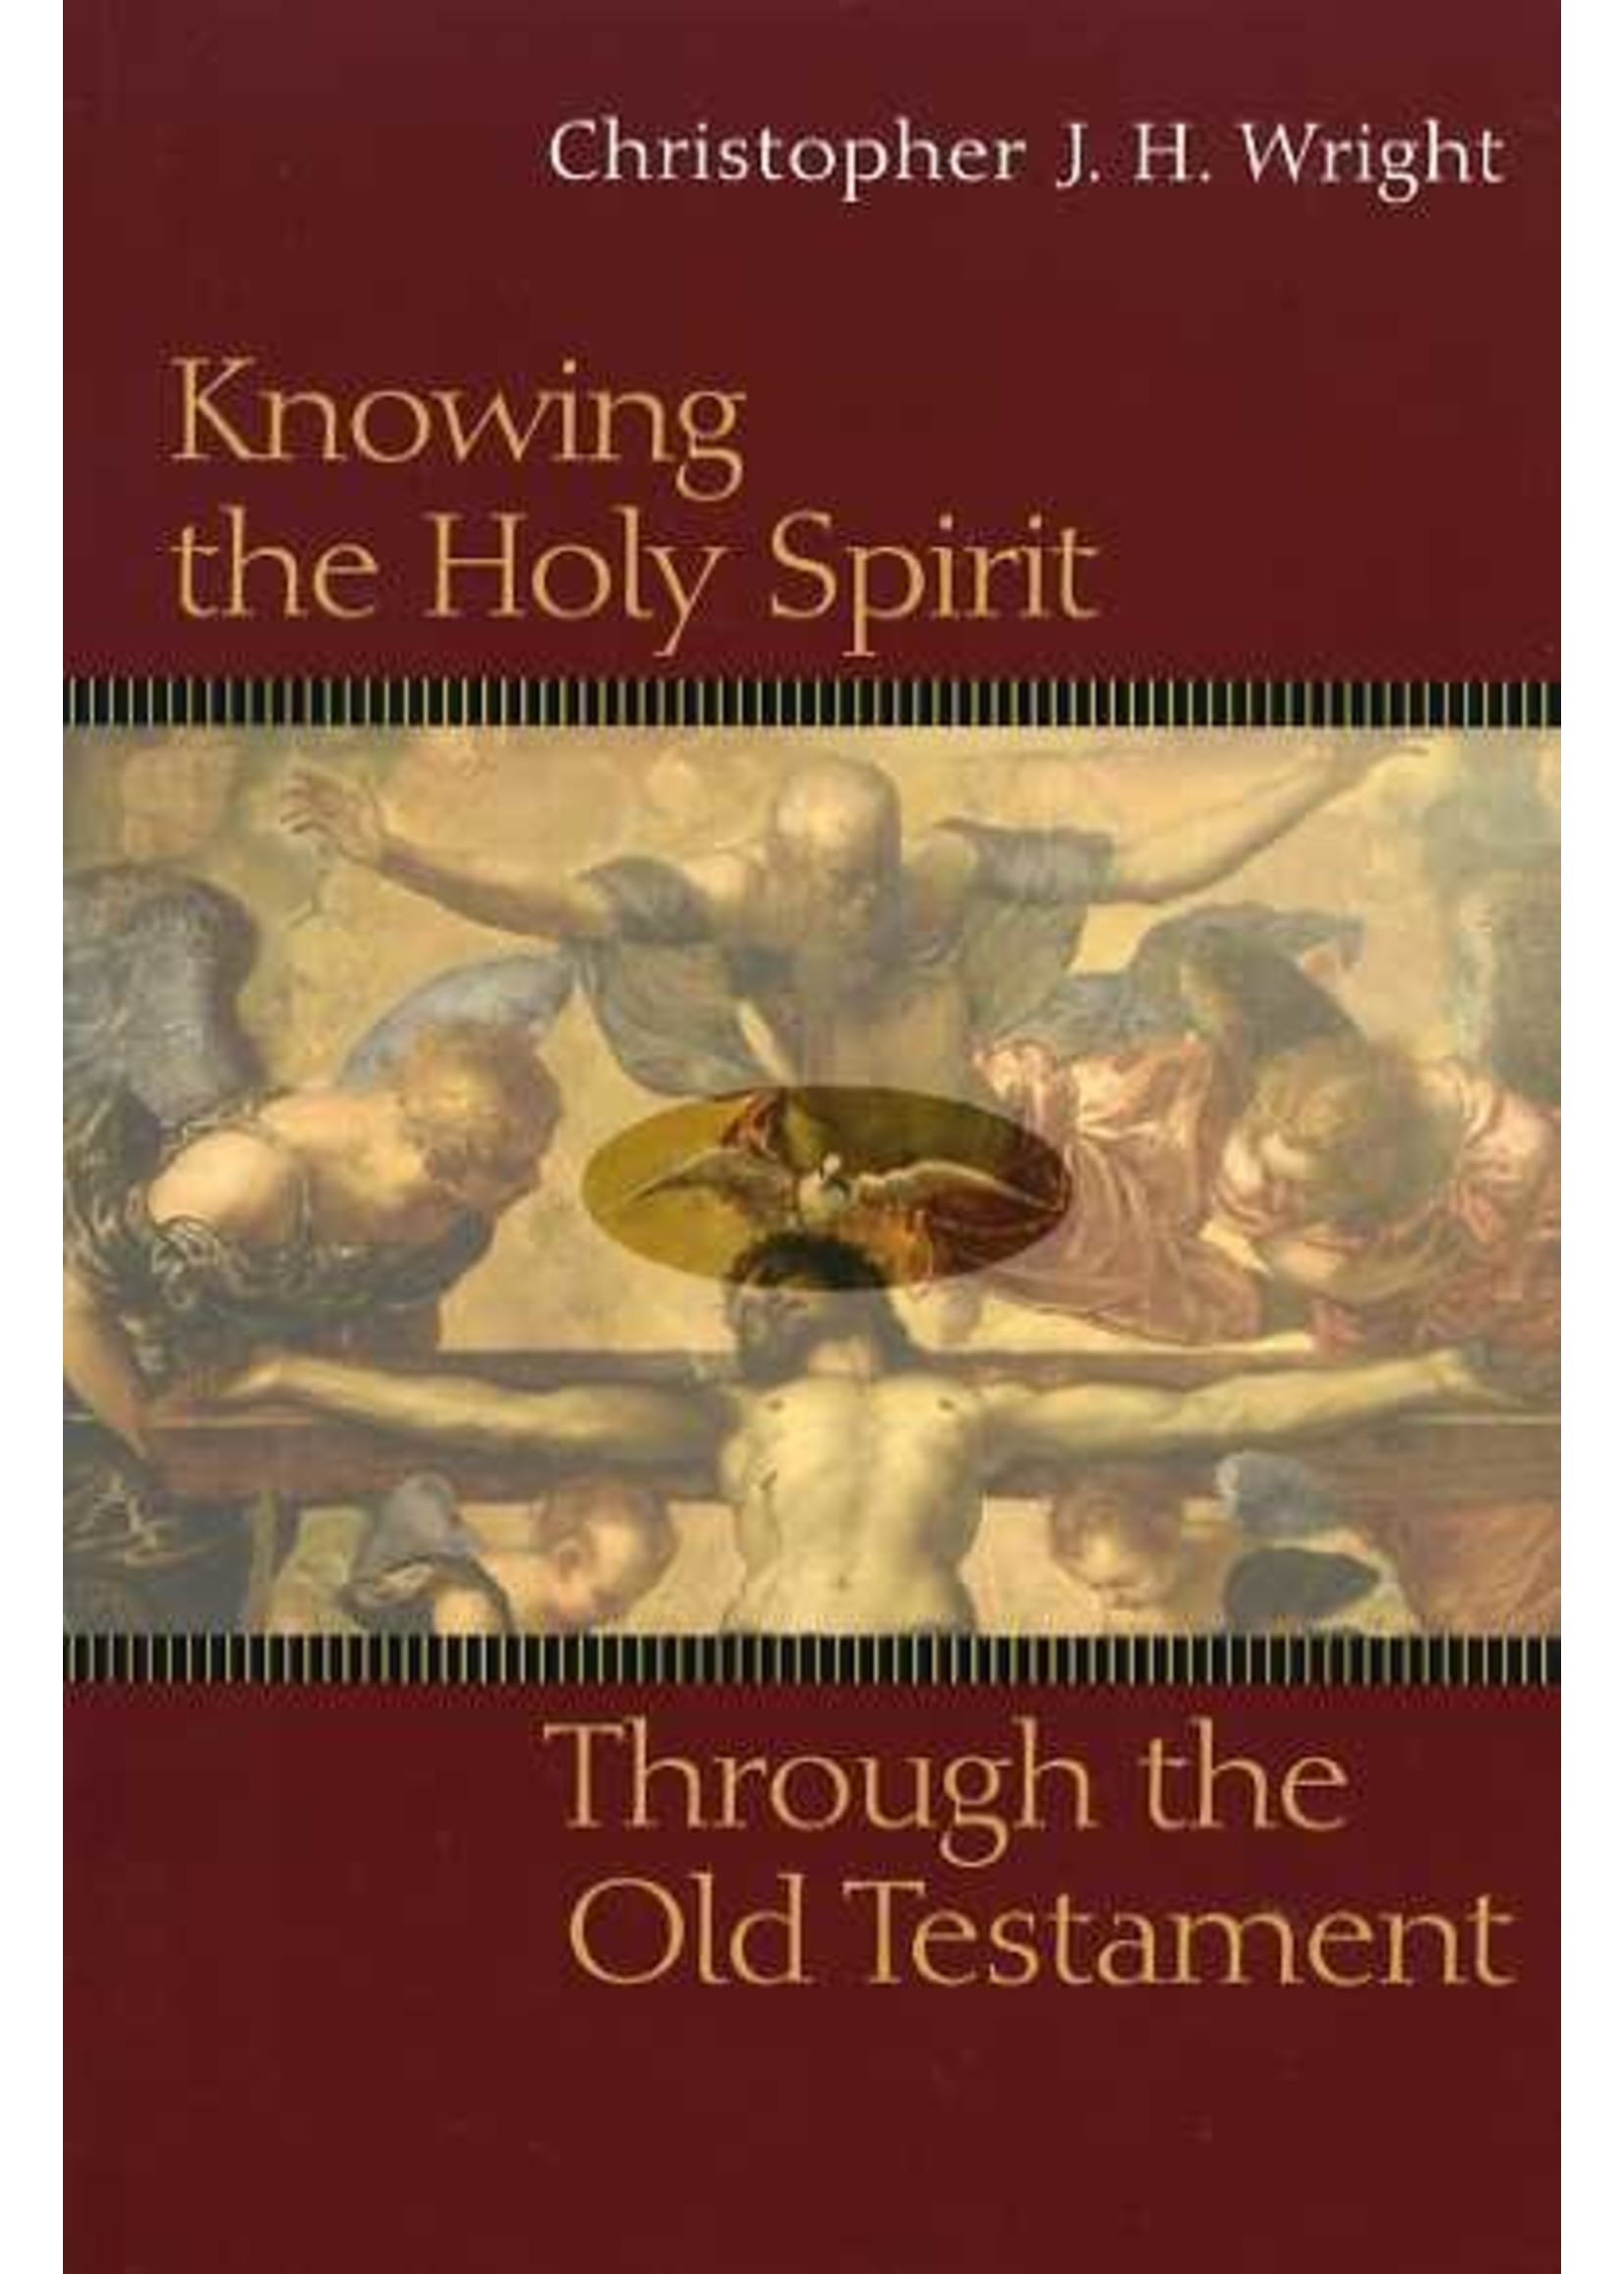 InterVarsity Press Knowing the Holy Spirit Through the Old Testament - C. Wright